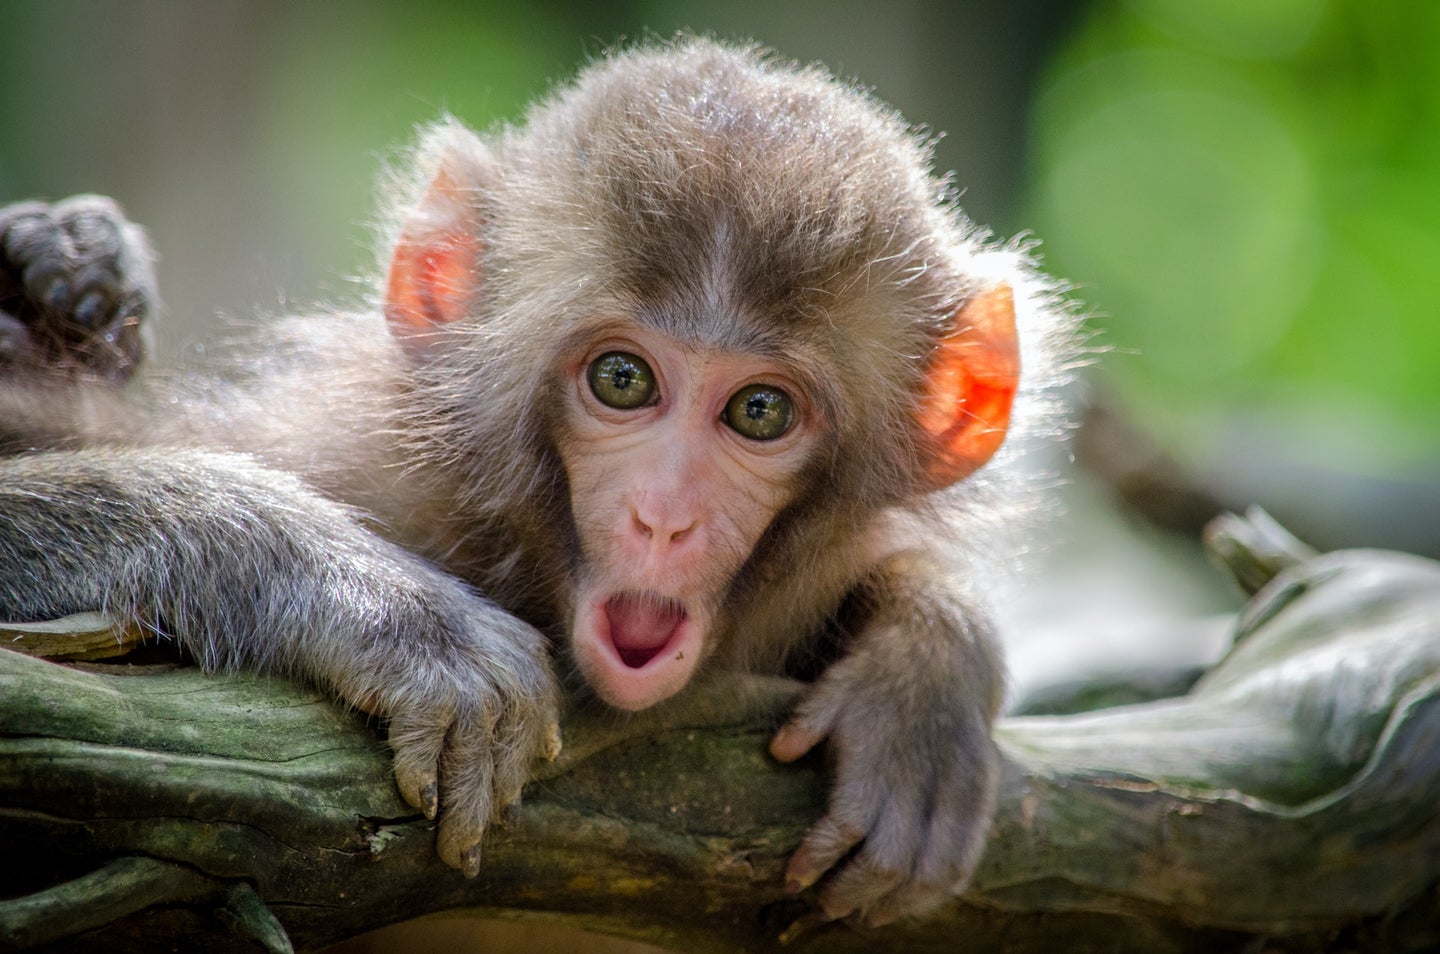 A small monkey looking surprised